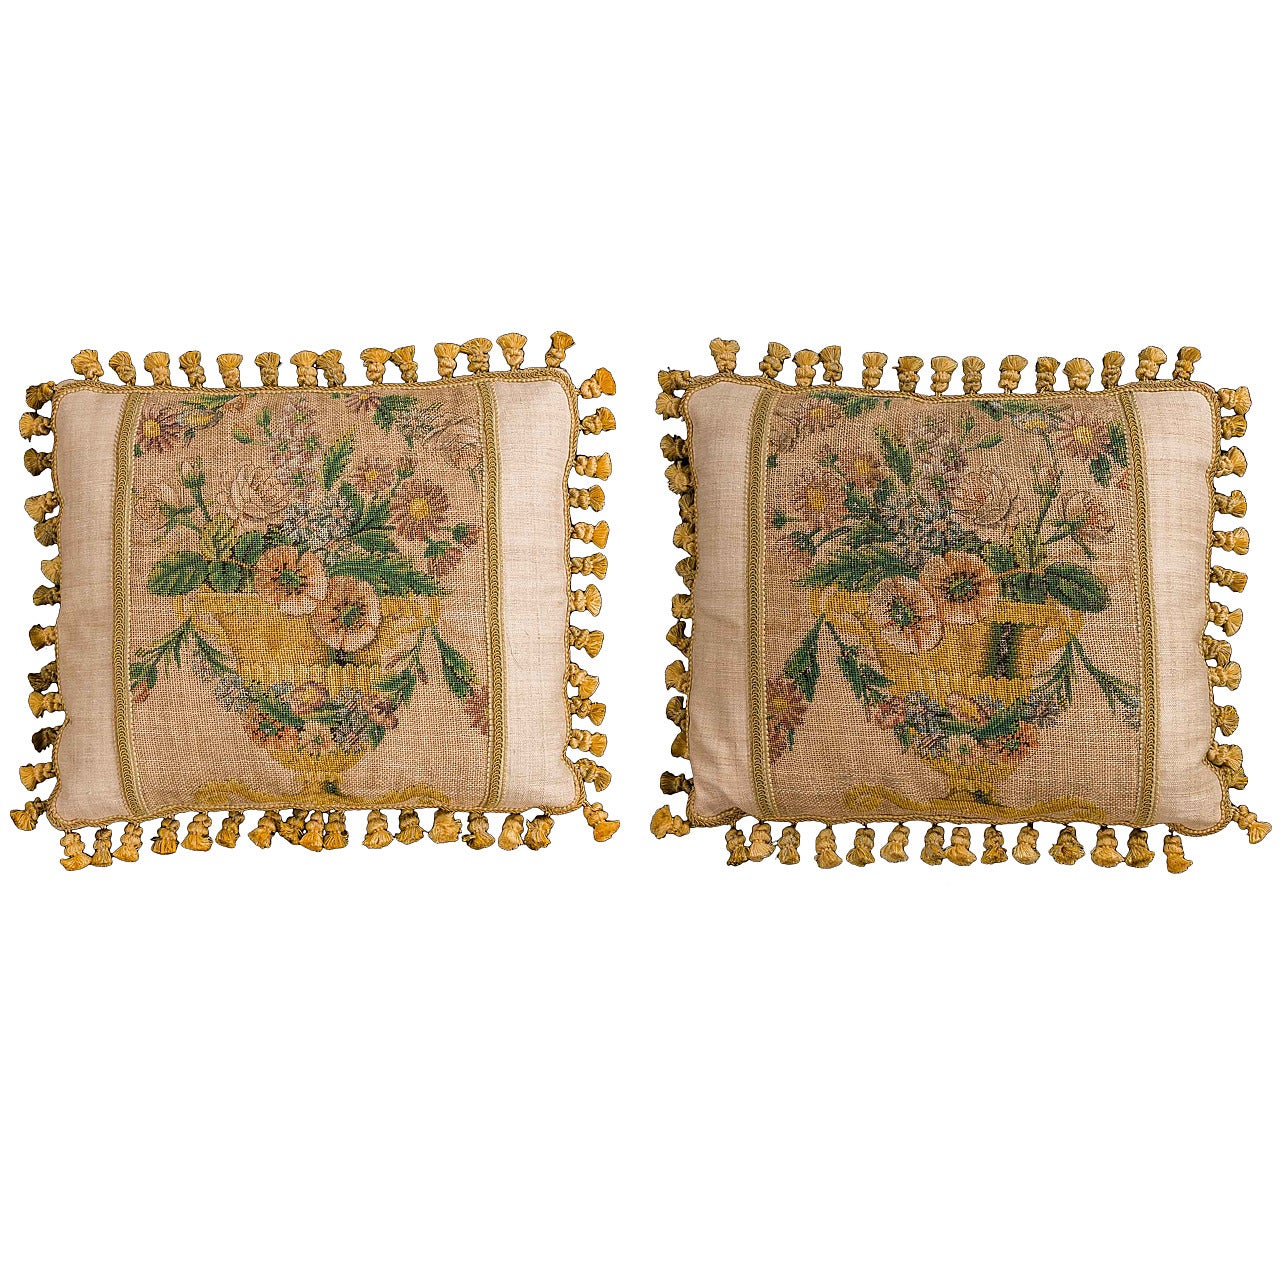 Cushions: Early 19th Century Pair. Silk with Wool highlights